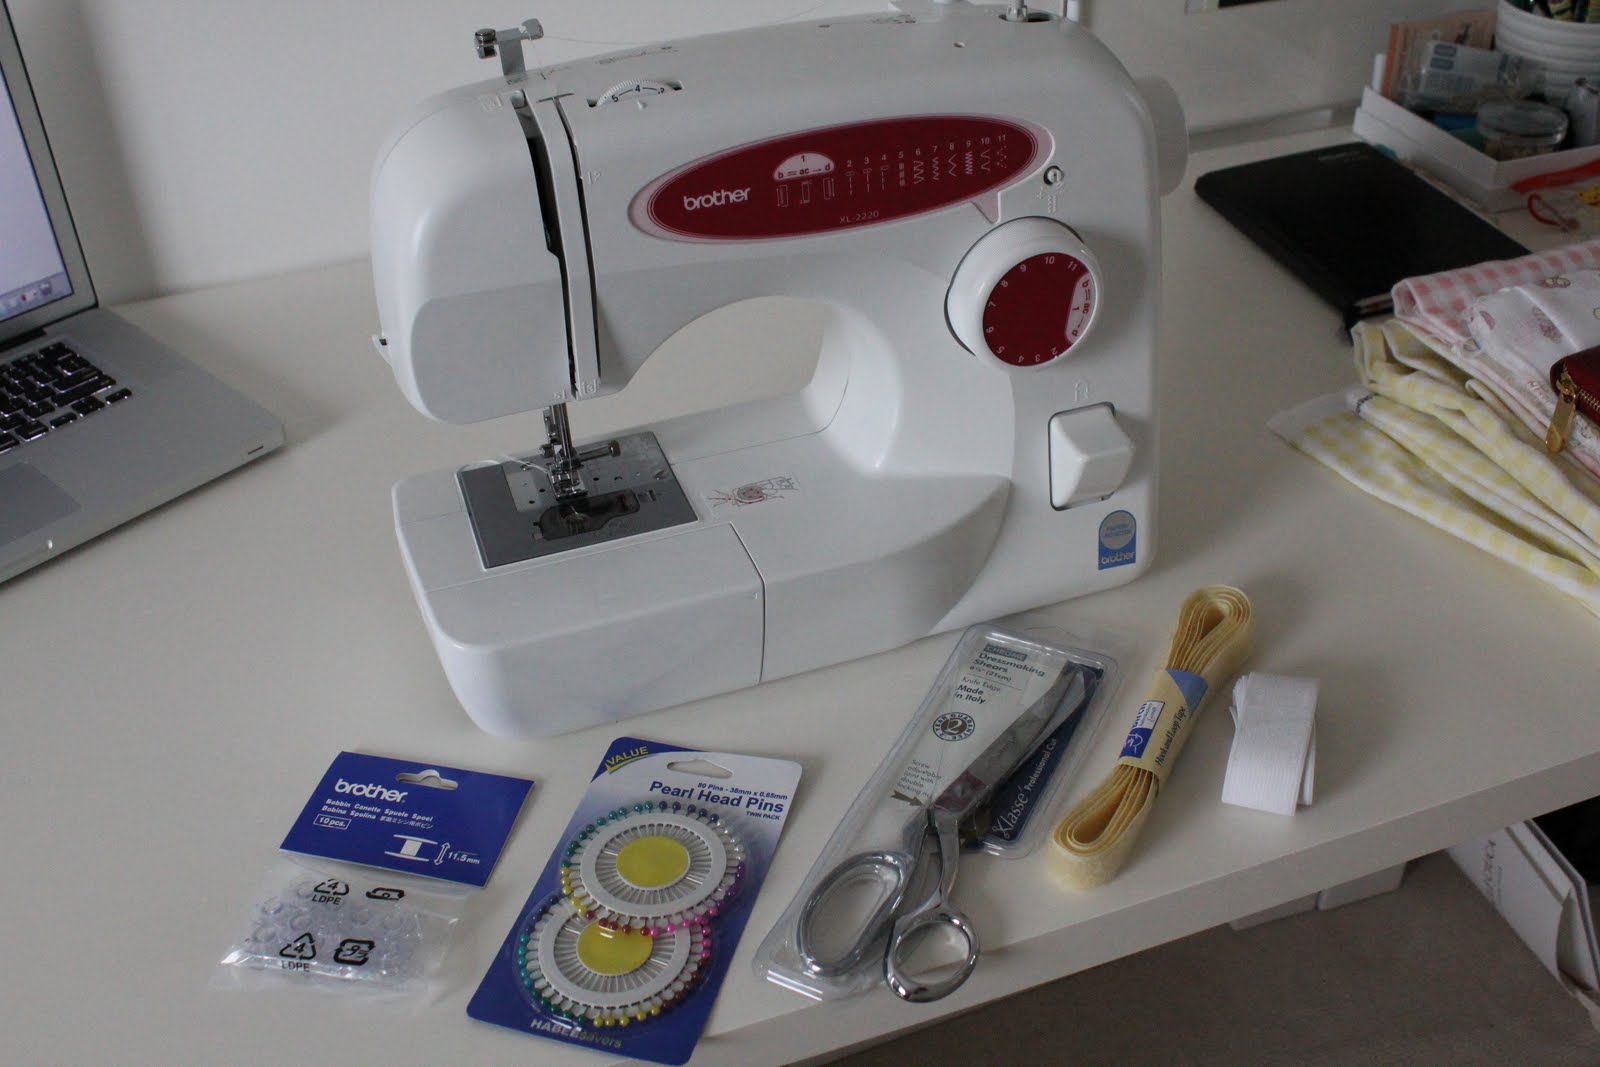 Cat'stronomy: Review: Brother Sewing Machine XL 2220